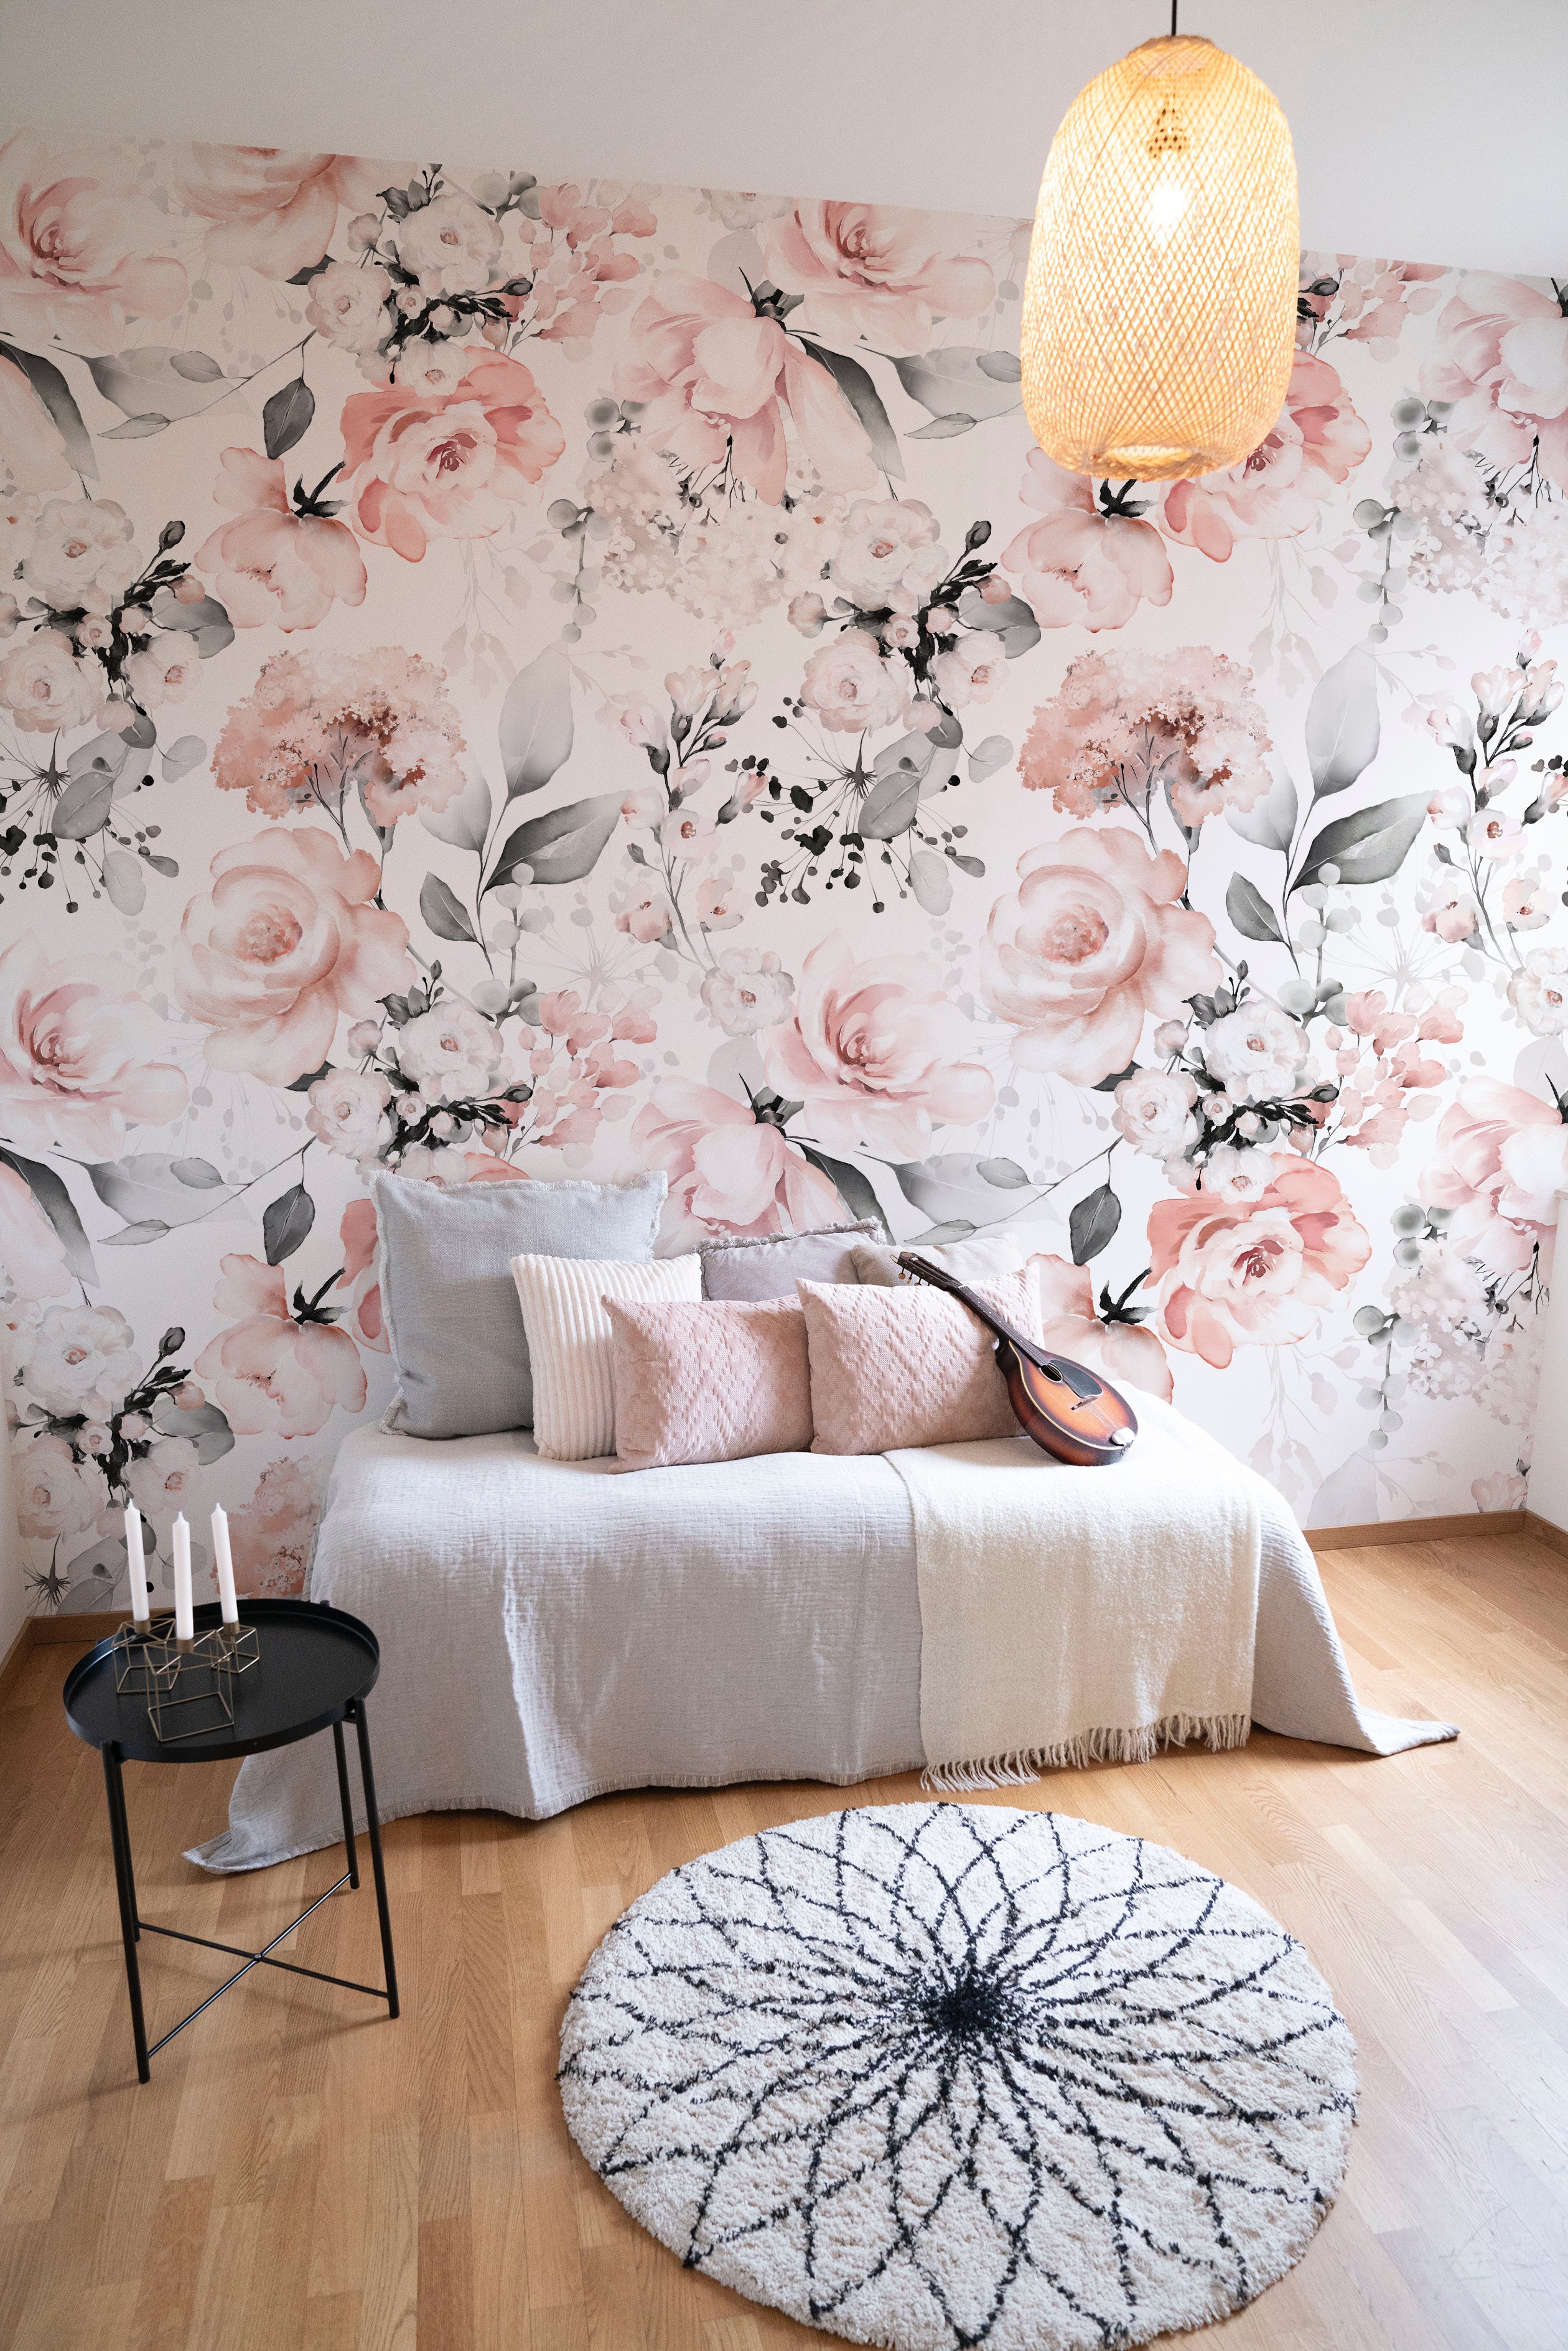 A cozy living room with a floral wallpaper accent wall. The wallpaper features a delicate pattern of pink flowers and grey leaves on a white background. The room includes a comfortable sofa with pastel cushions, a round rug, a small black side table with candles, and a hanging wicker lamp